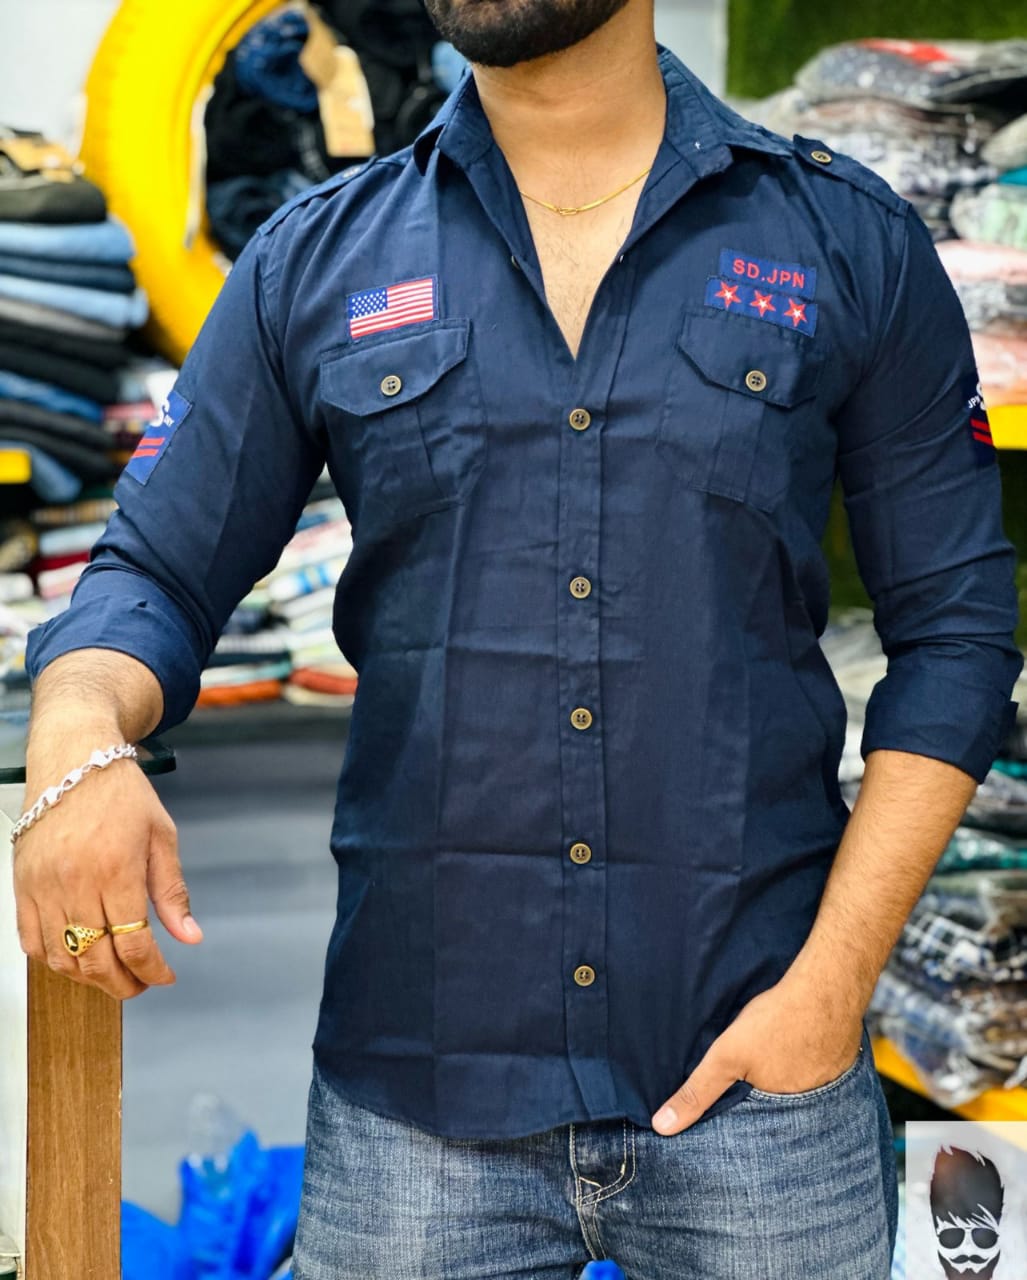 Details View - Cargo shirts photos - reseller,reseller marketplace,advetising your products,reseller bazzar,resellerbazzar.in,india's classified site,cargo shirts for men | cargo shirts | double pocket cargo shirts